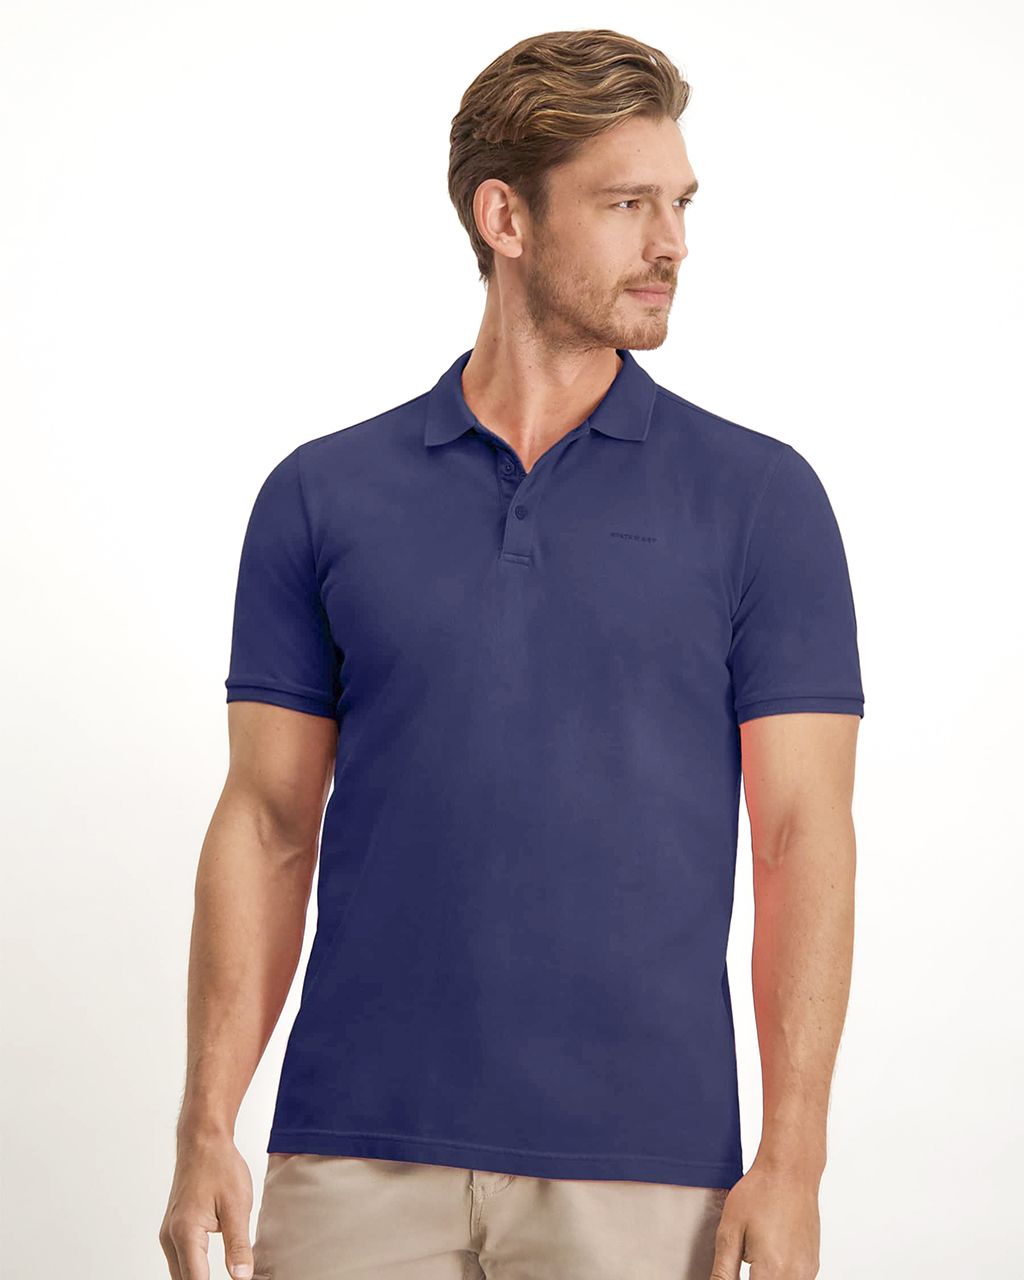 State of Art Polo KM Donker blauw 075928-001-4XL